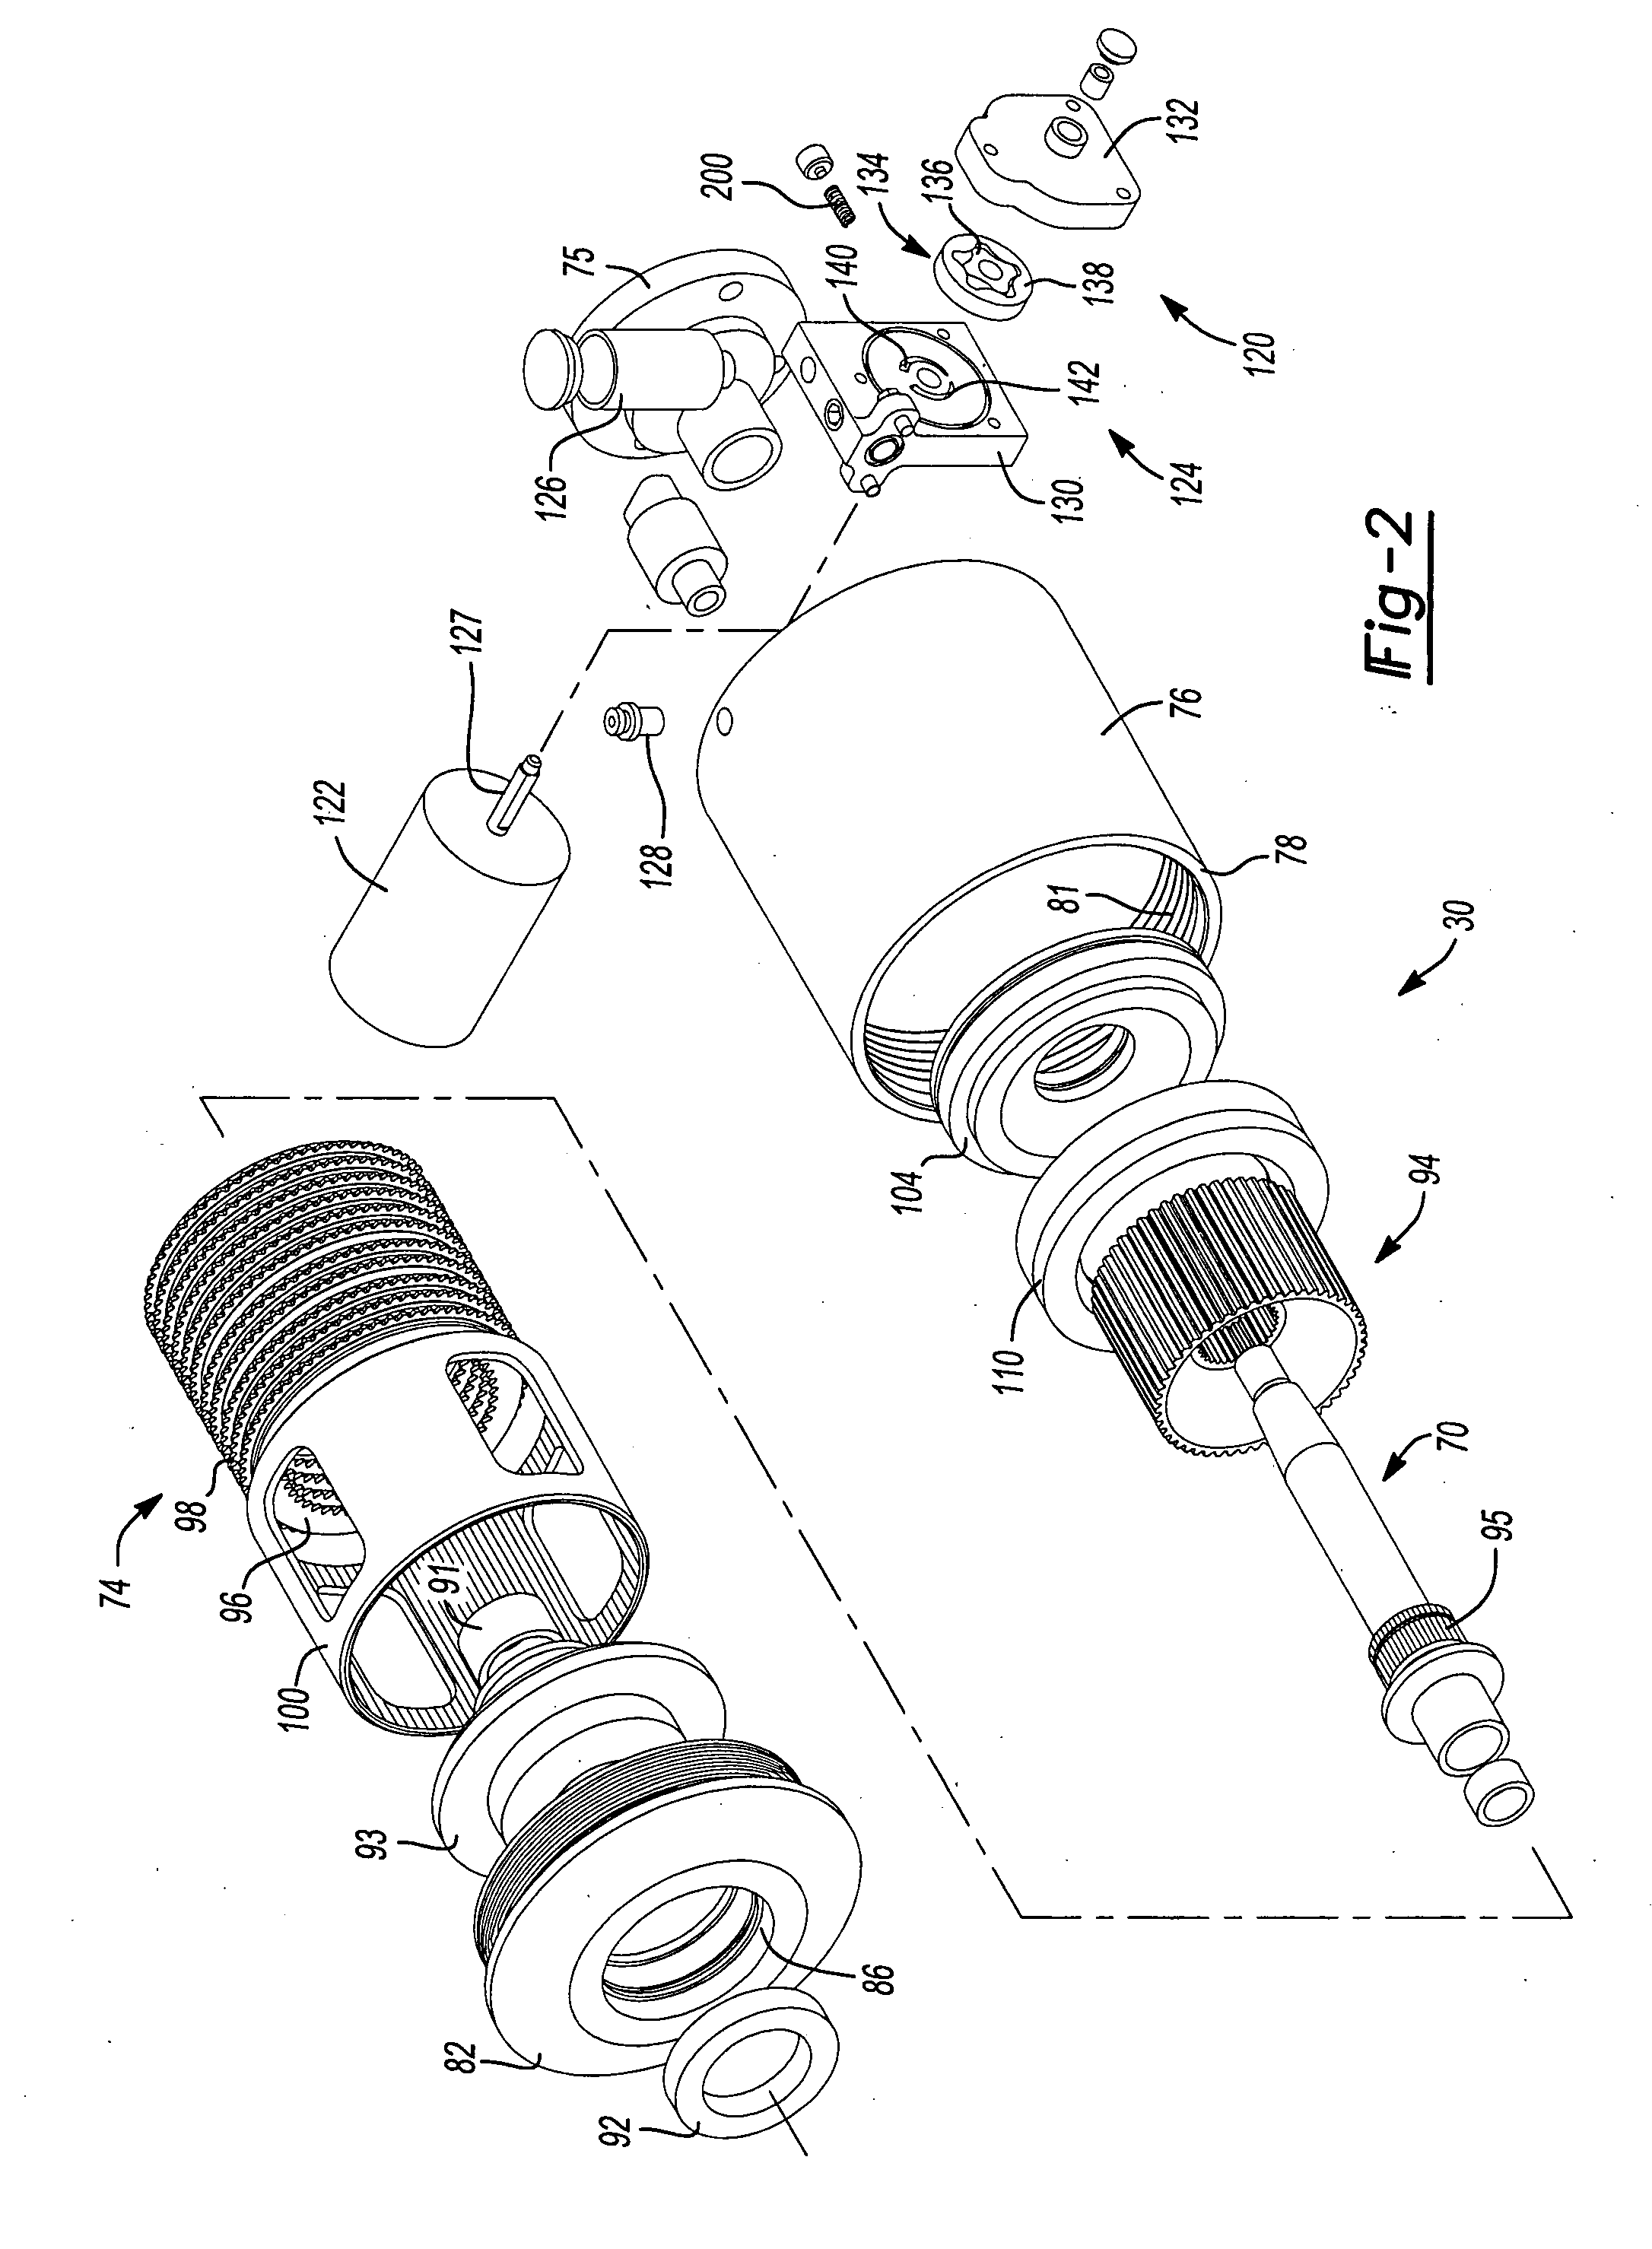 Electrohydraulic torque transfer device and control system